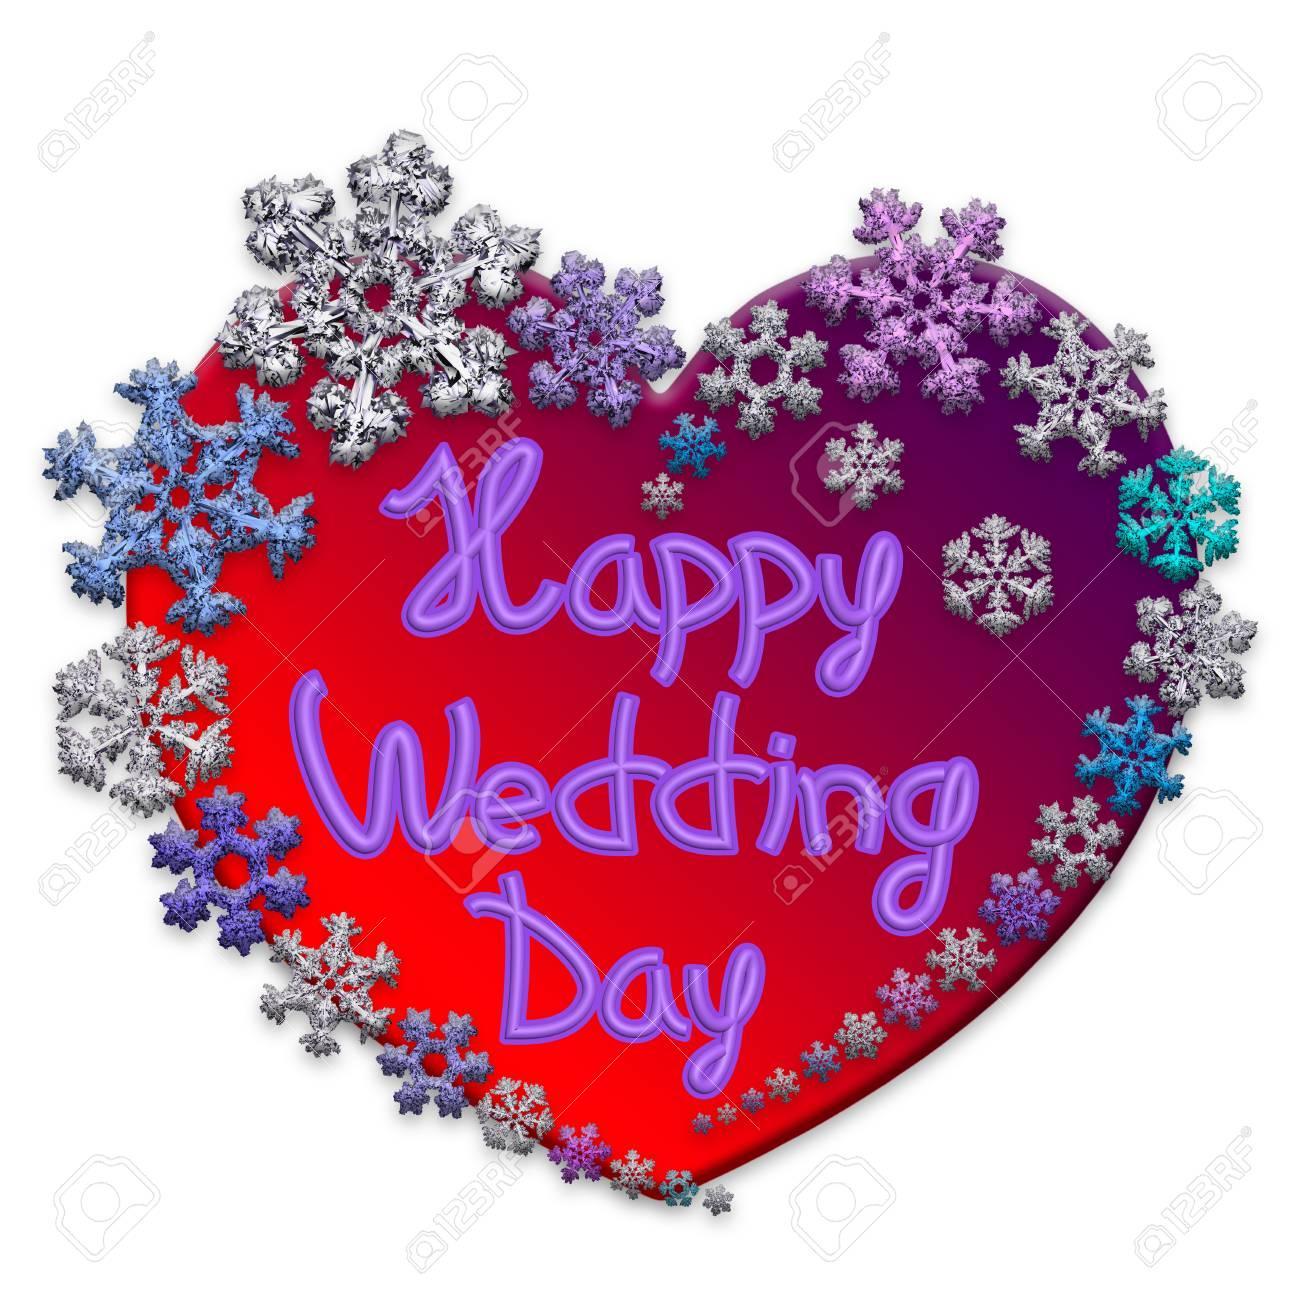 Happy Wedding Day For Android Apk Download